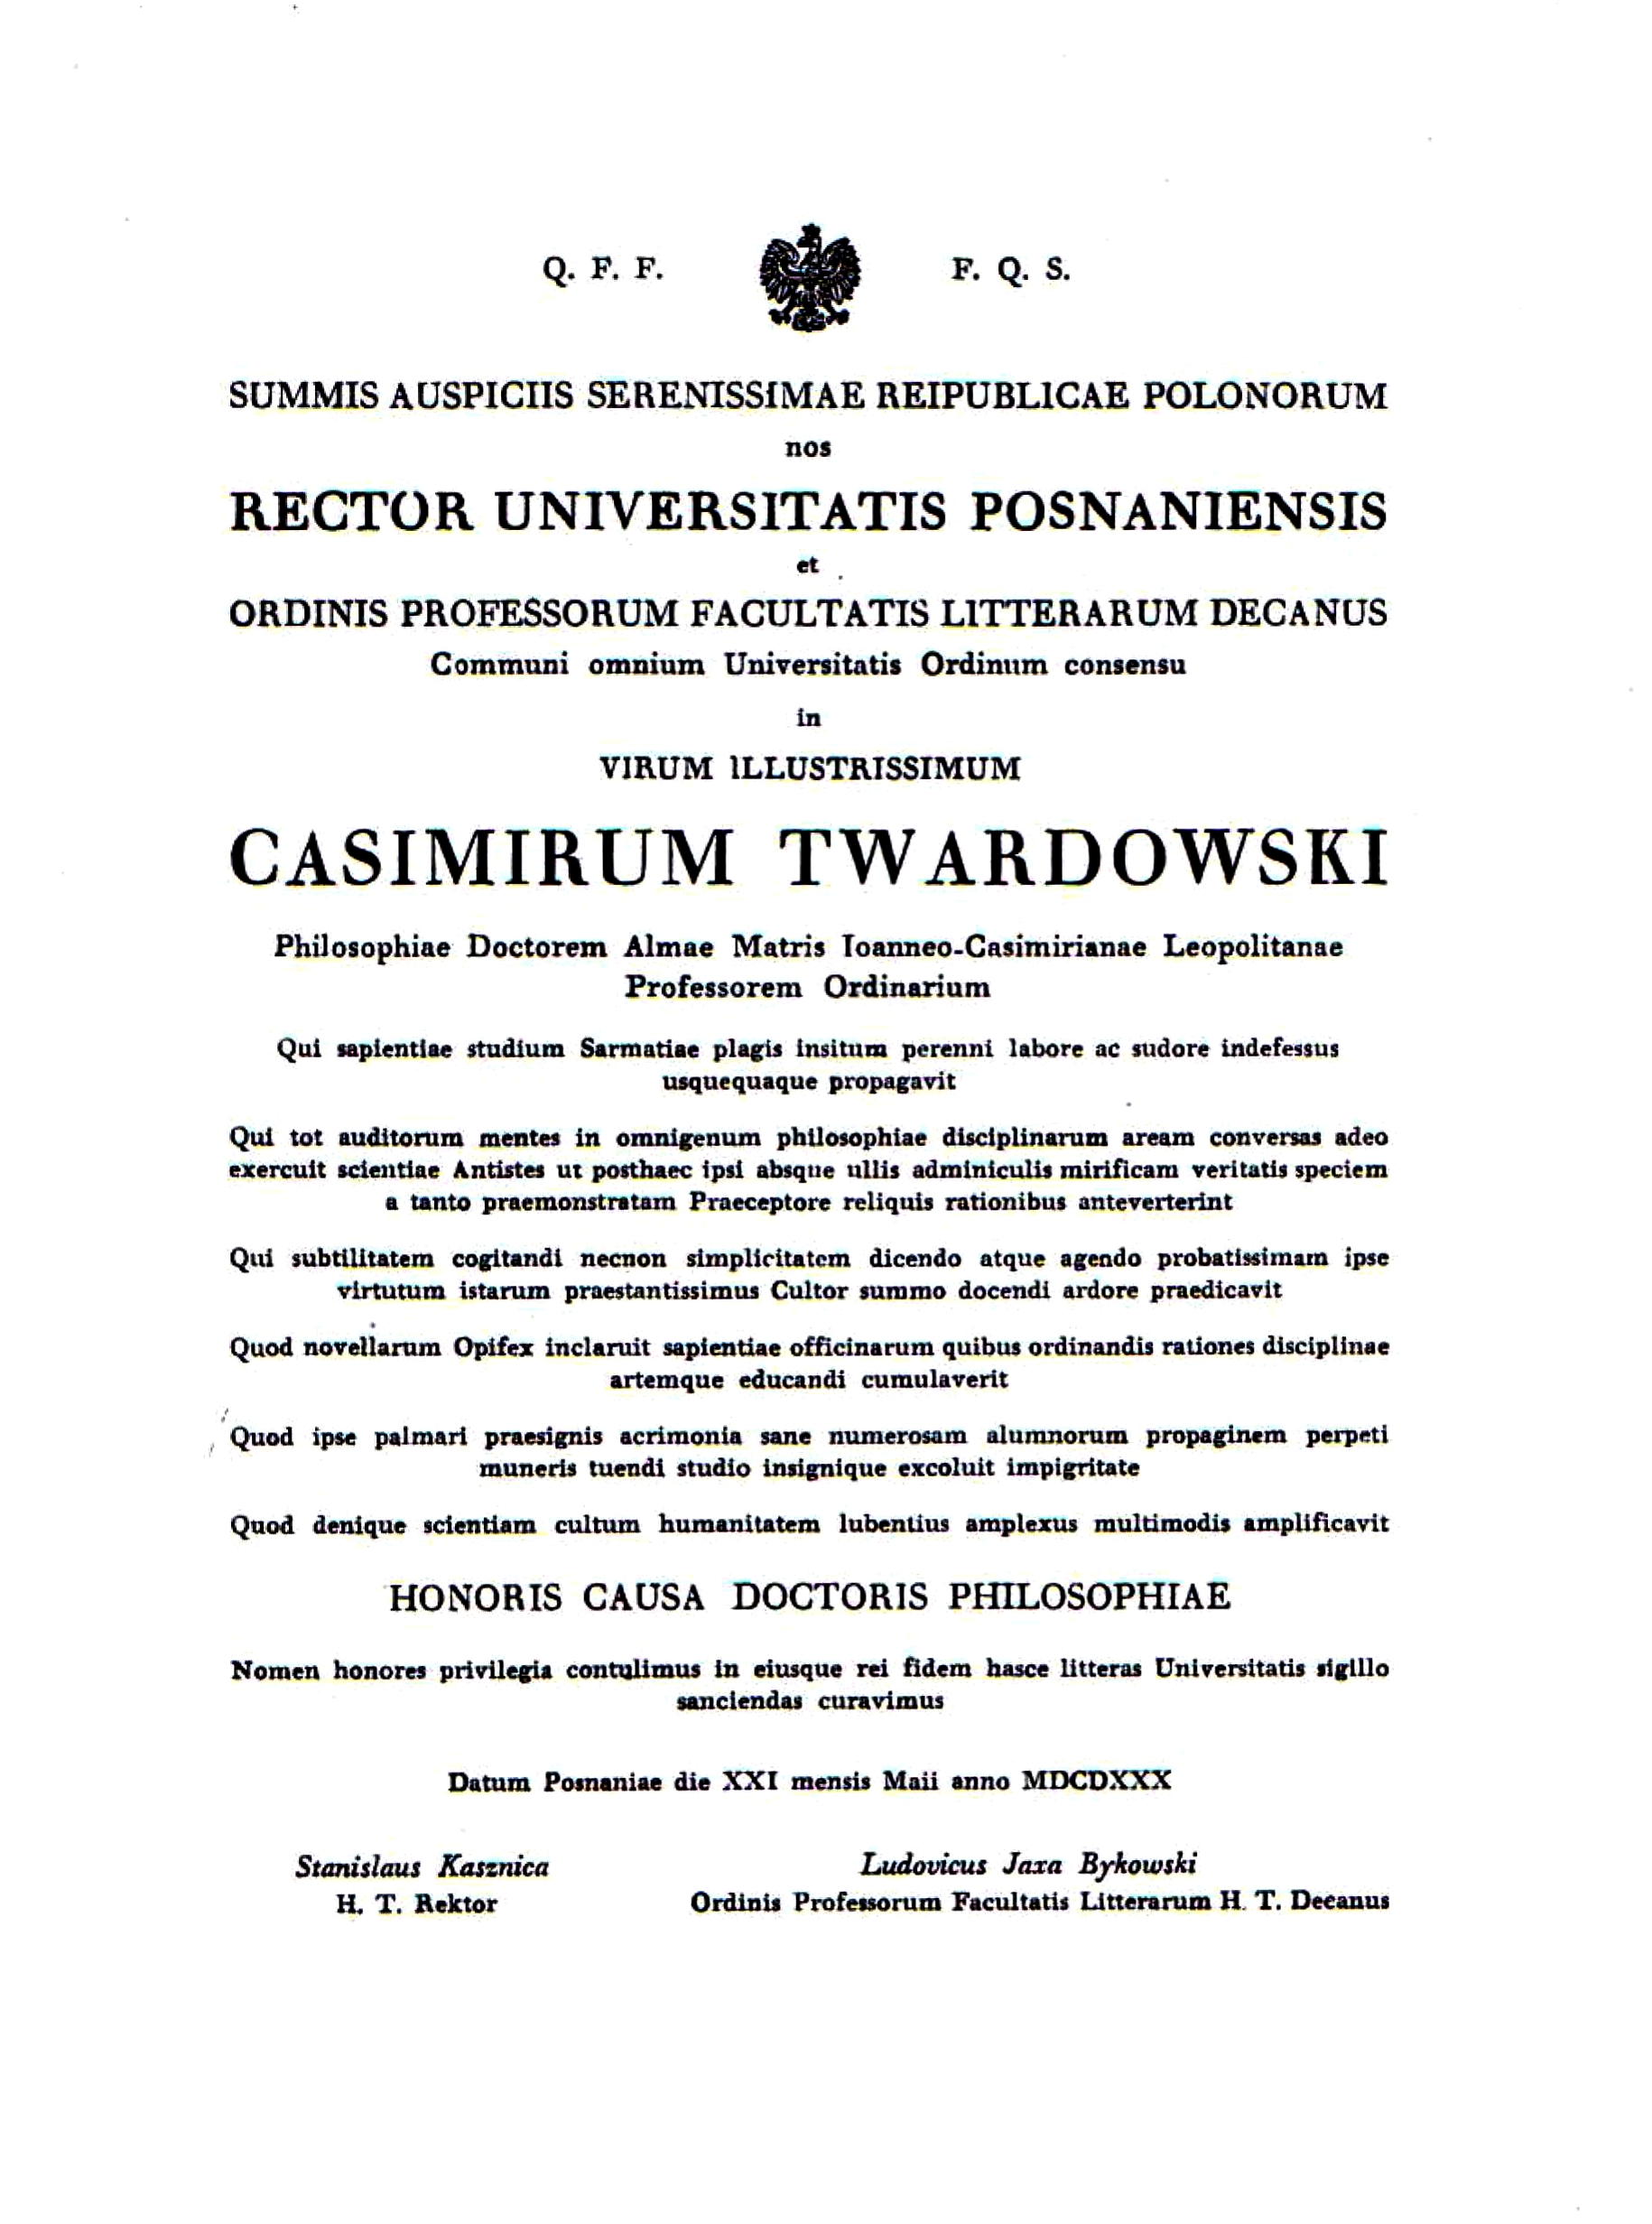 Diploma of the honorary doctorate of the University of Poznań (1930)